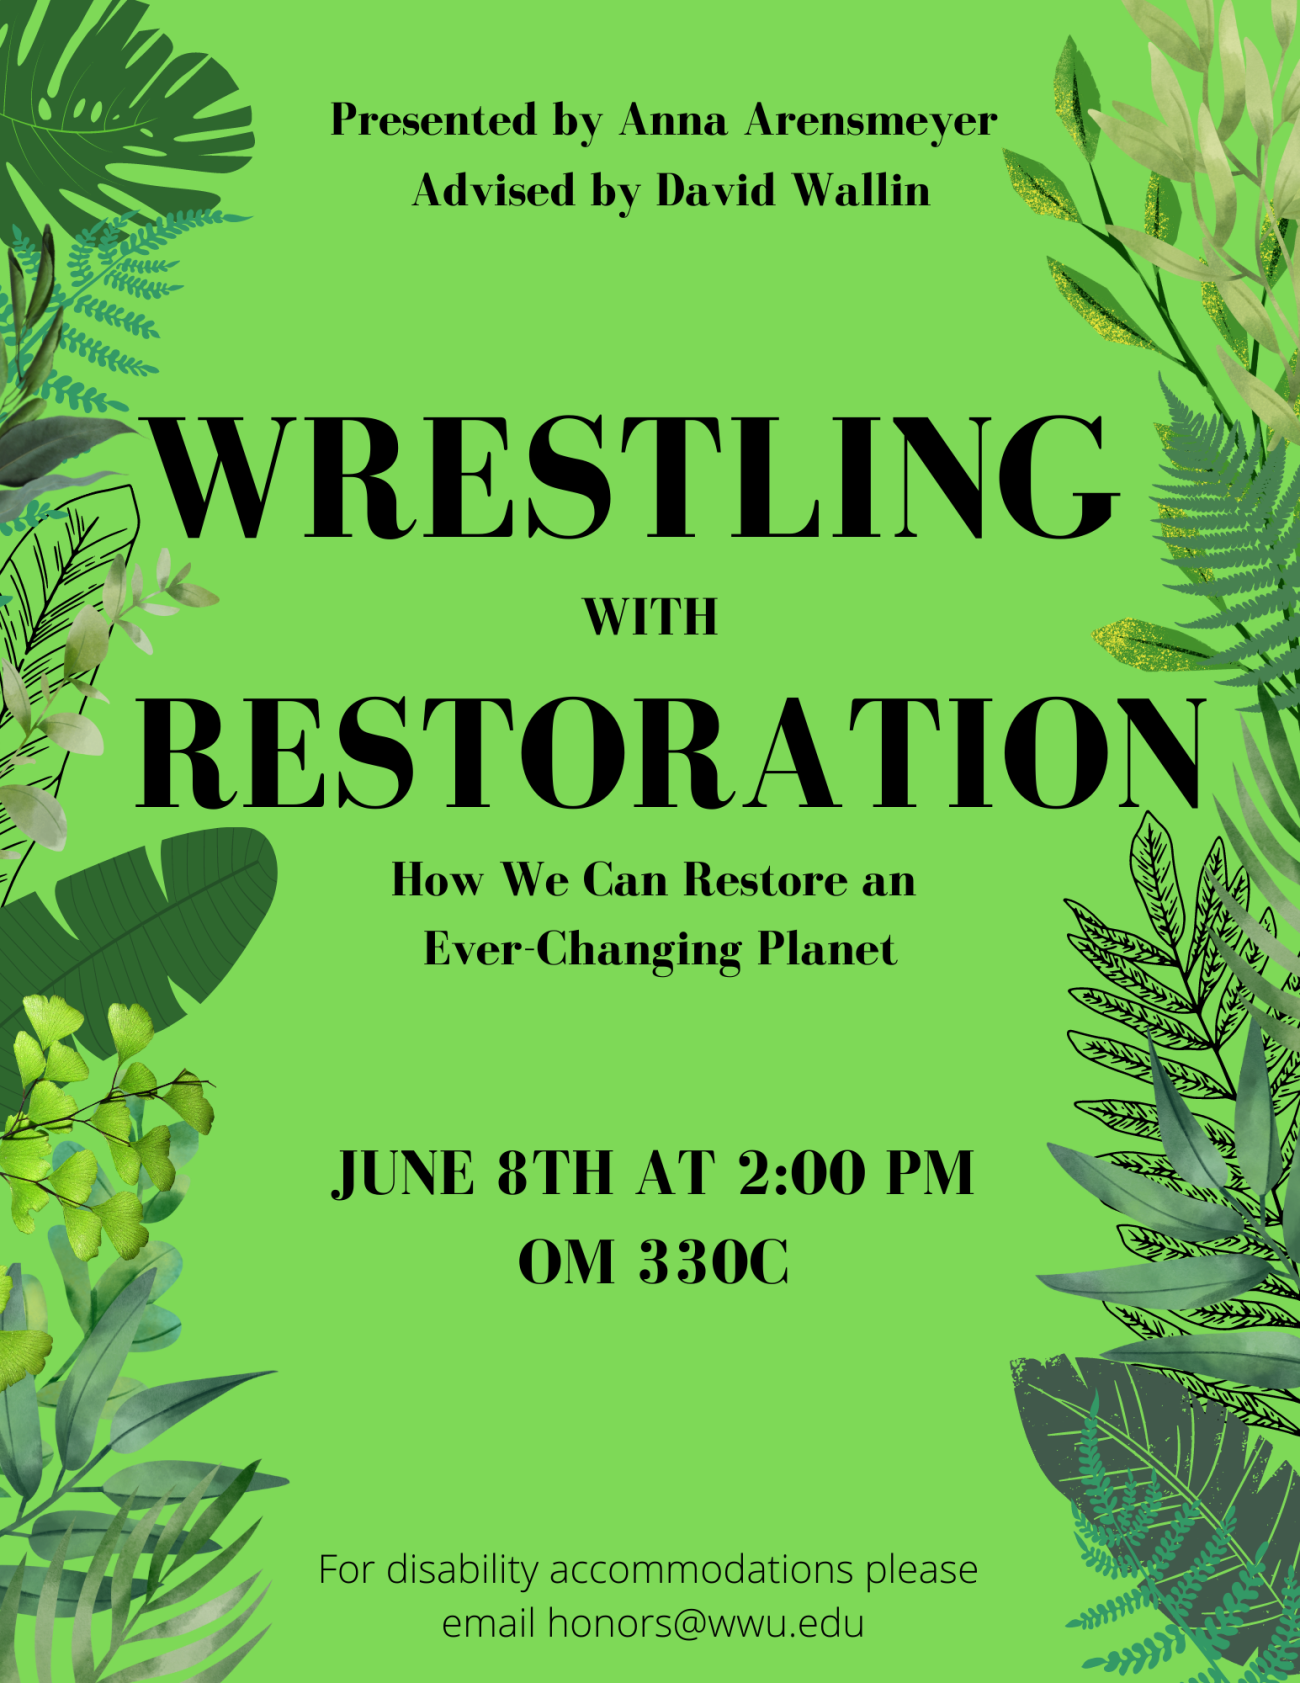 A flyer with a green background and foliage emerging from the right and left borders. Text reads "Wresting with Restoration: How We Can Restore an Ever-Changing Planet. June 8th at 2:00 PM in OM 330C. For disability accommodations please email honors@ww.edu. Presented by Anna Arensmeyer. Advised by David Wallin."